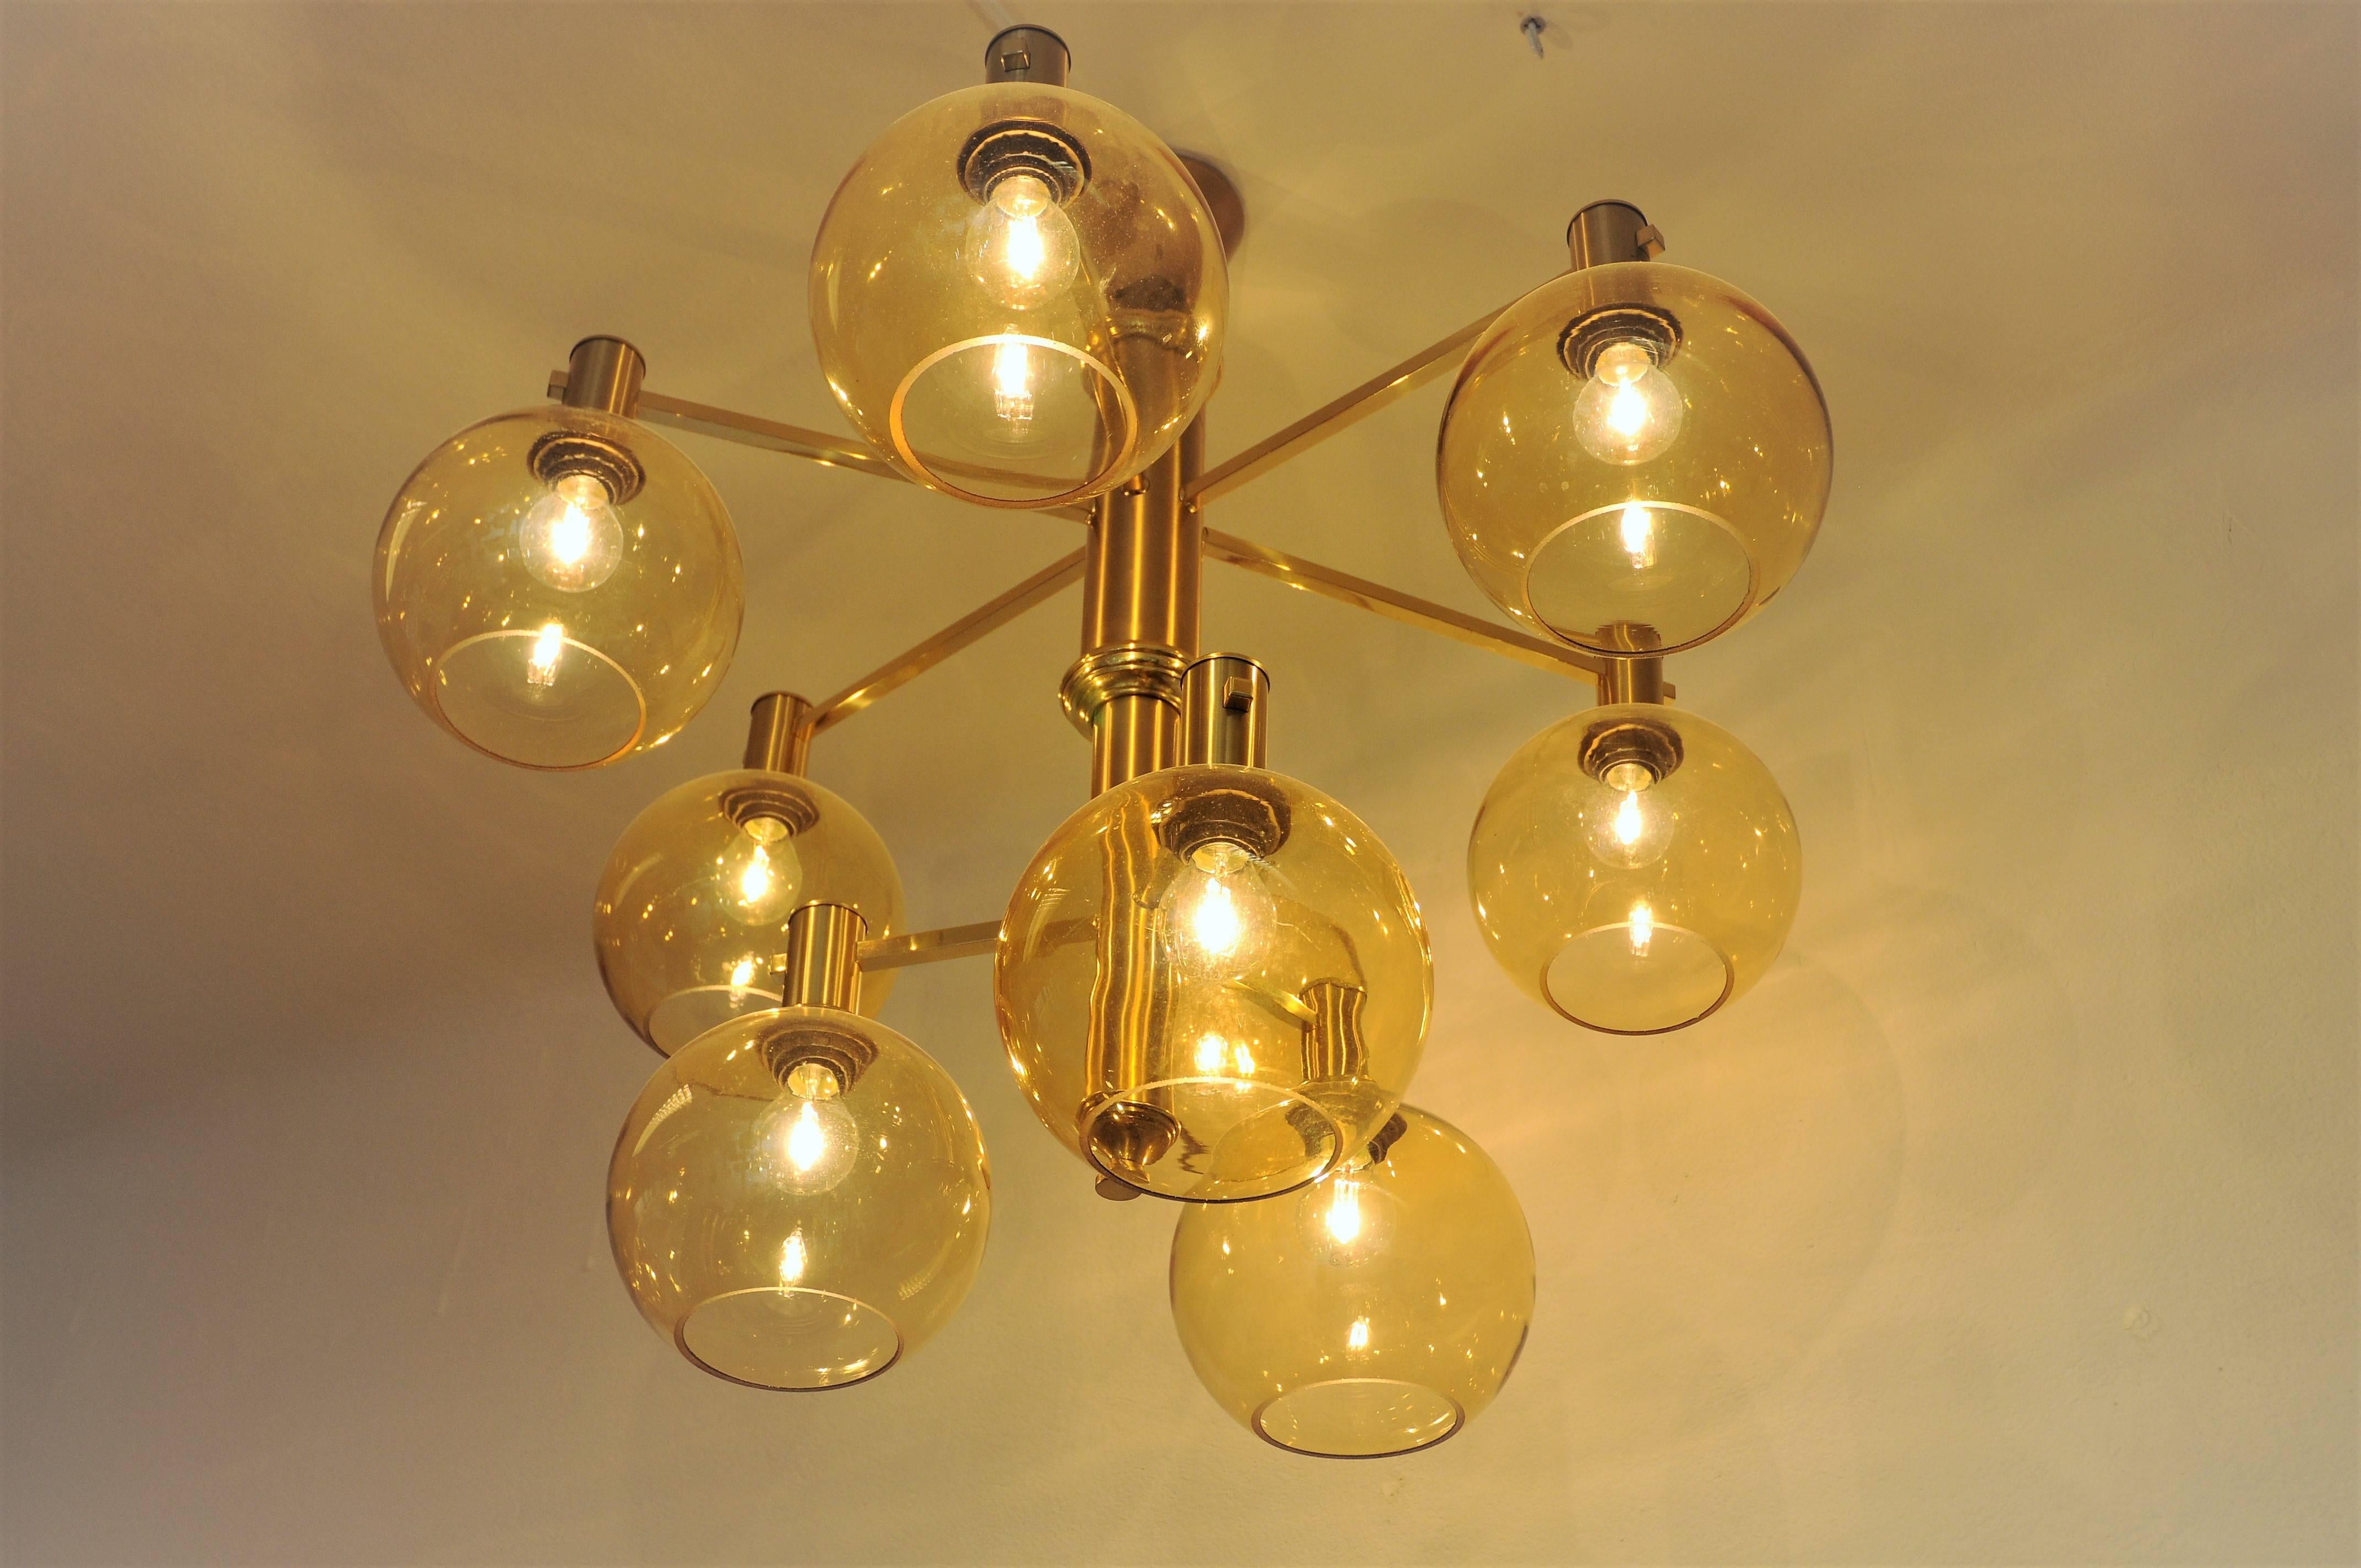 Scandinavian Modern Large Vintage Brass and Glass Ceiling Lamp with golden domes 1960`s, Sweden